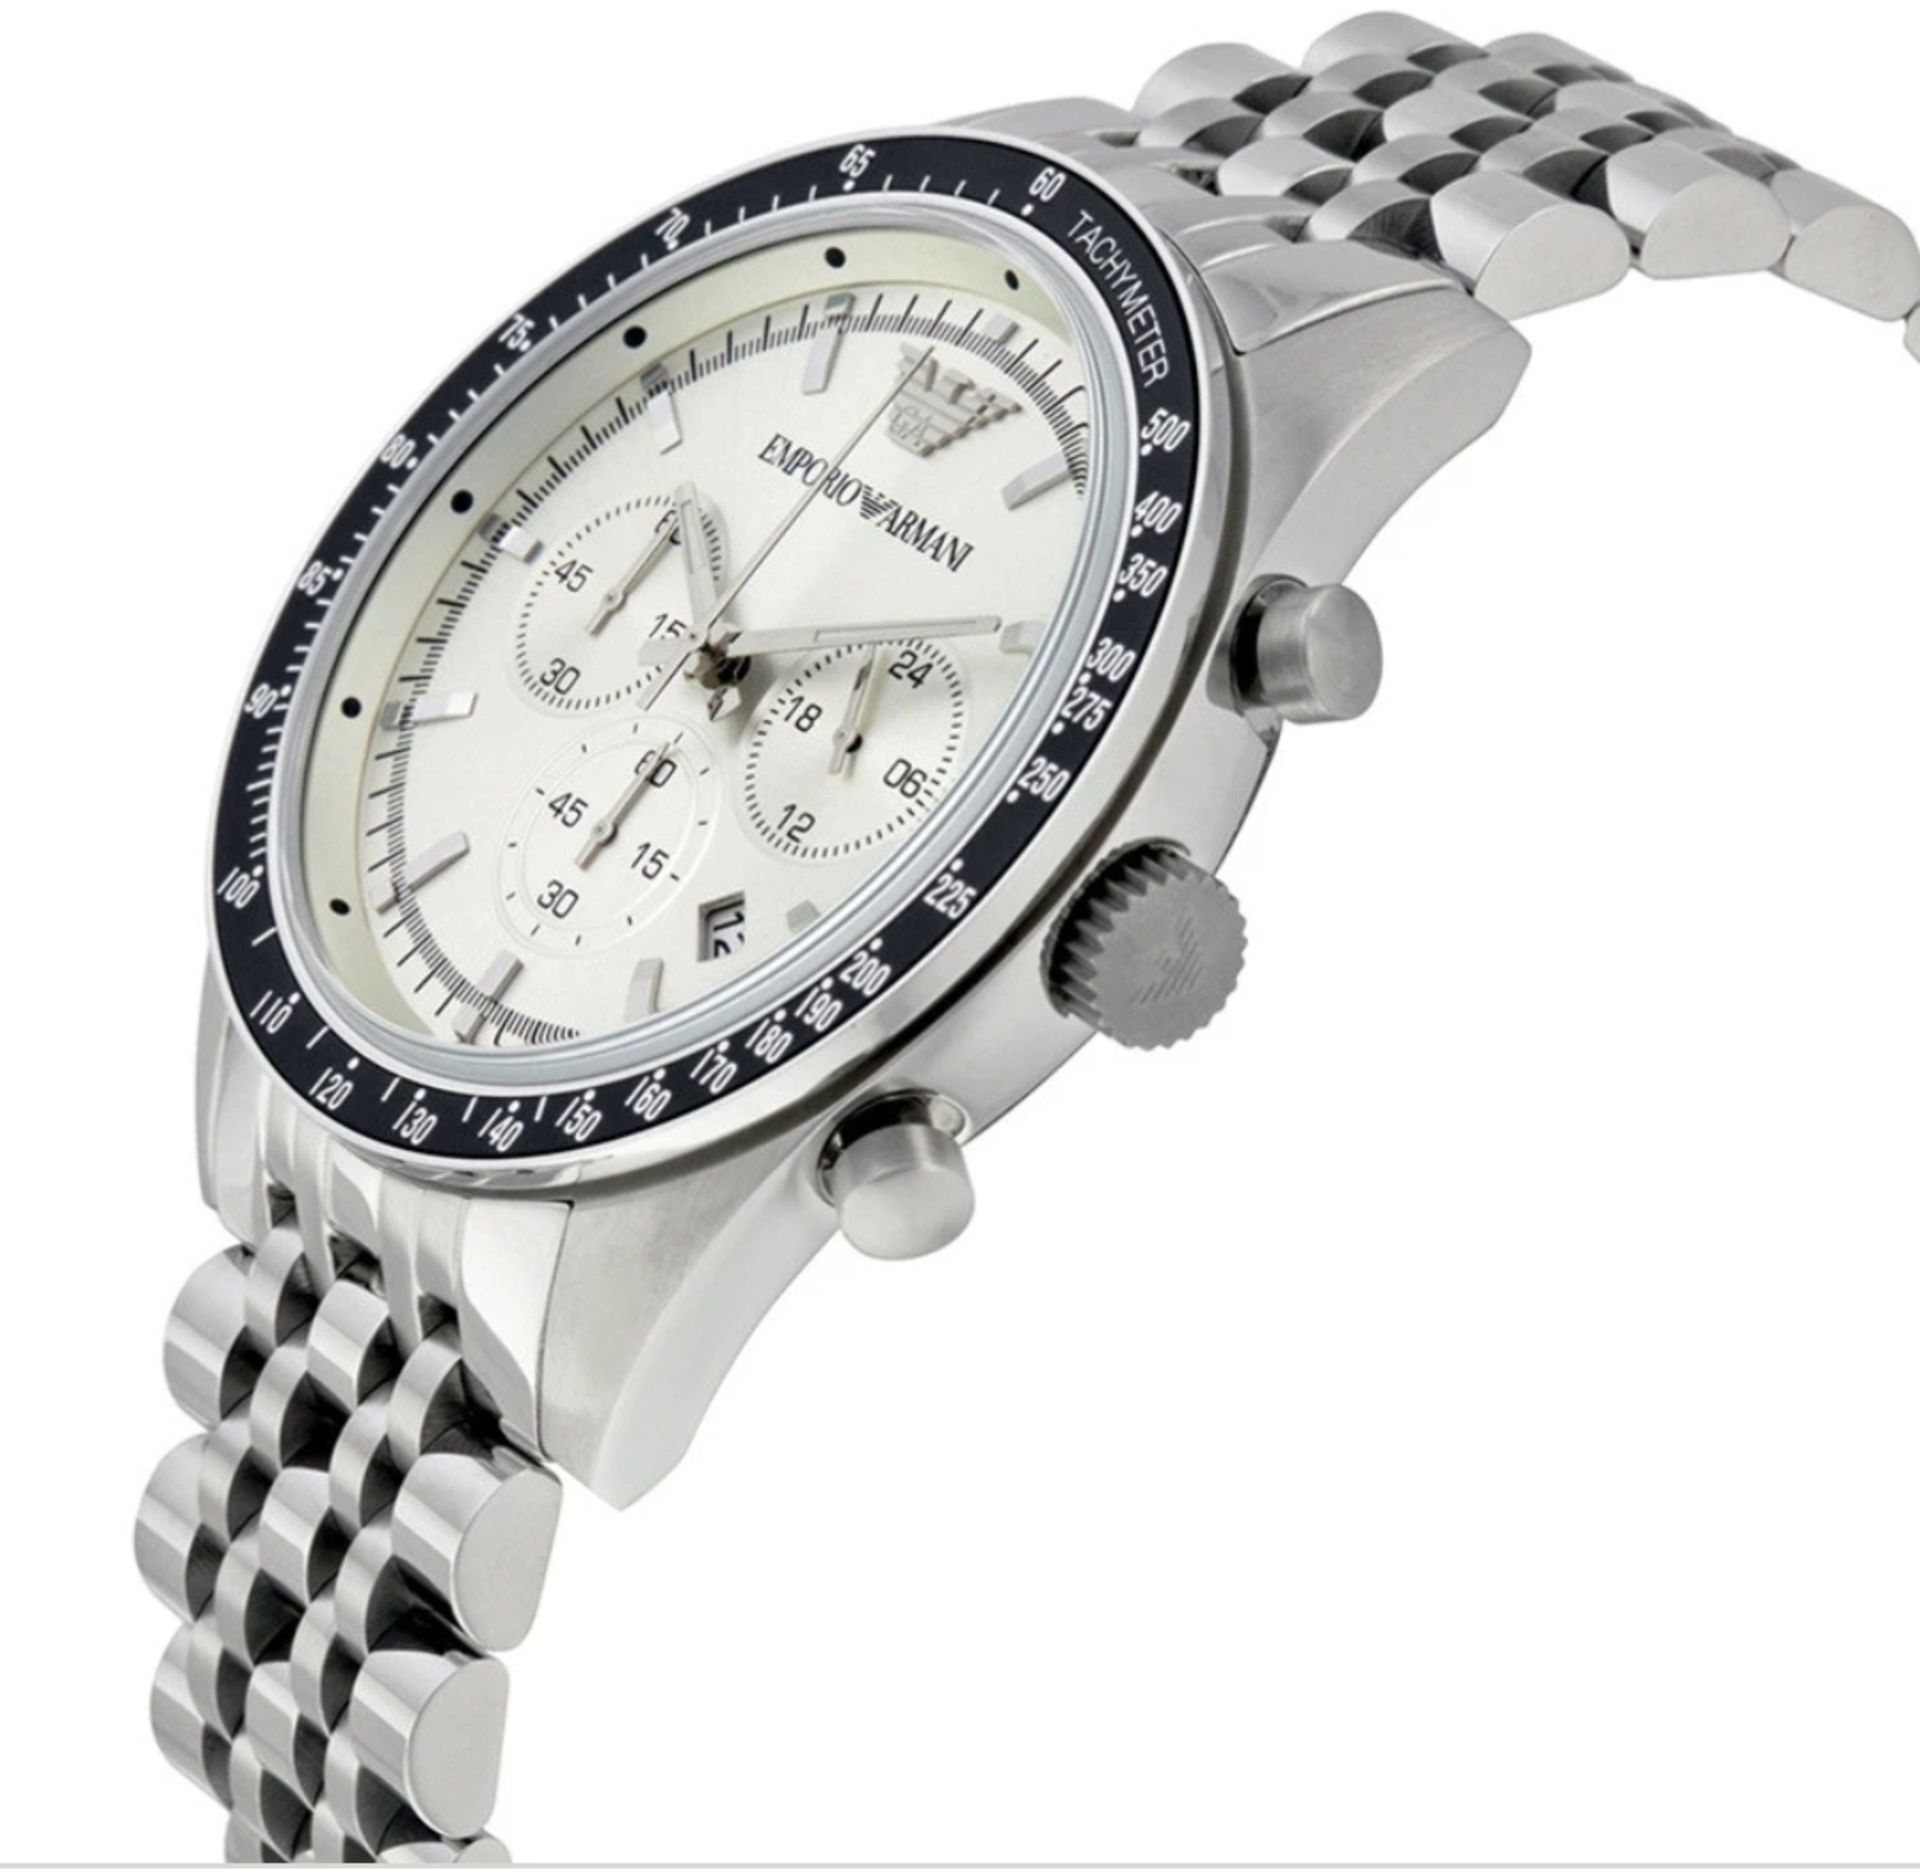 AR6073 Emporio Armani Men's Sportivo Silver Stainless Steel Chronograph Watch - Image 6 of 7